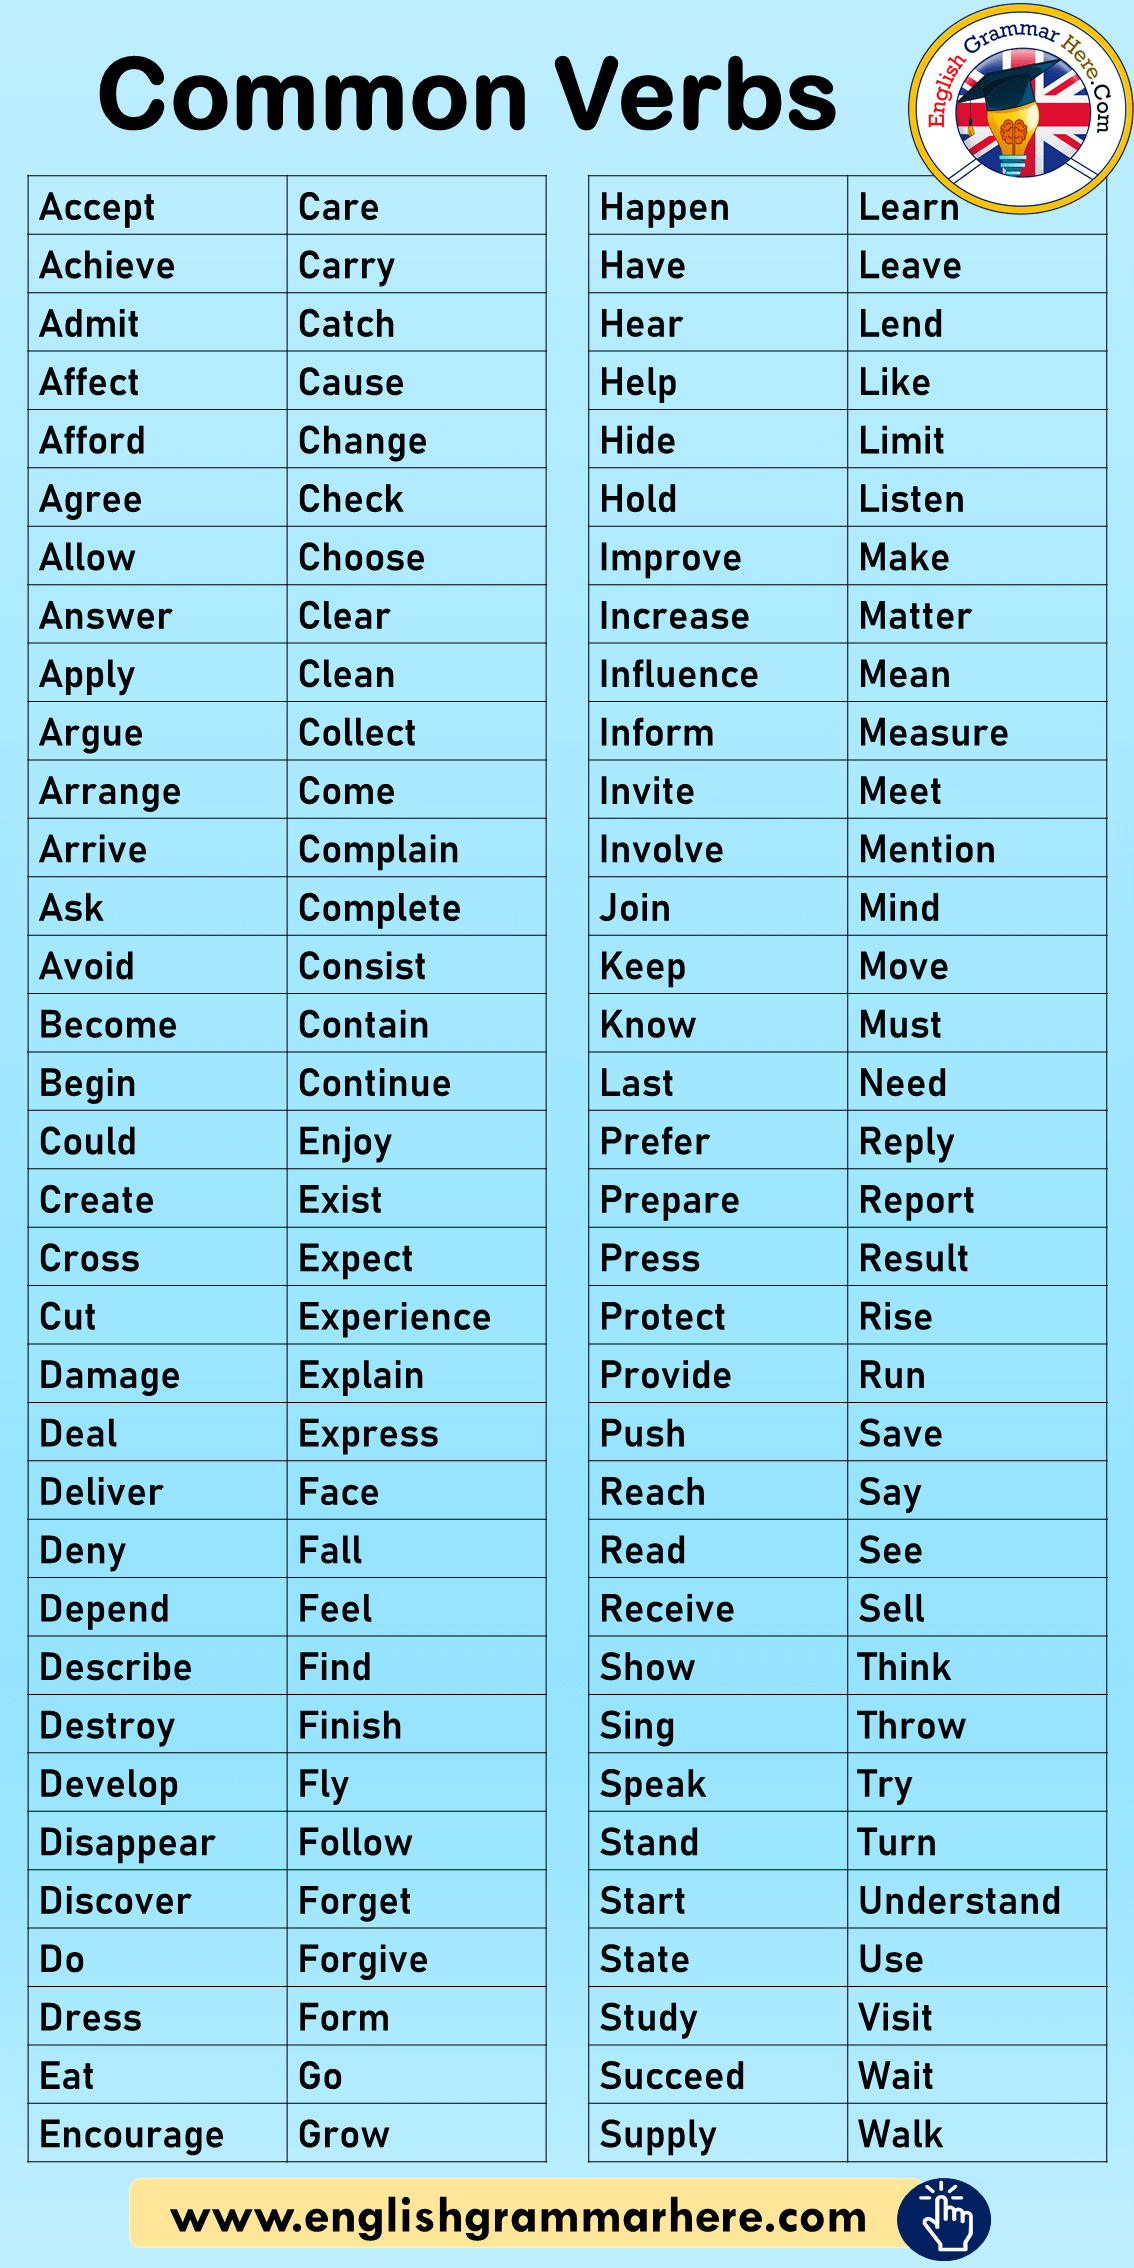 Commonly Used Verbs List in English